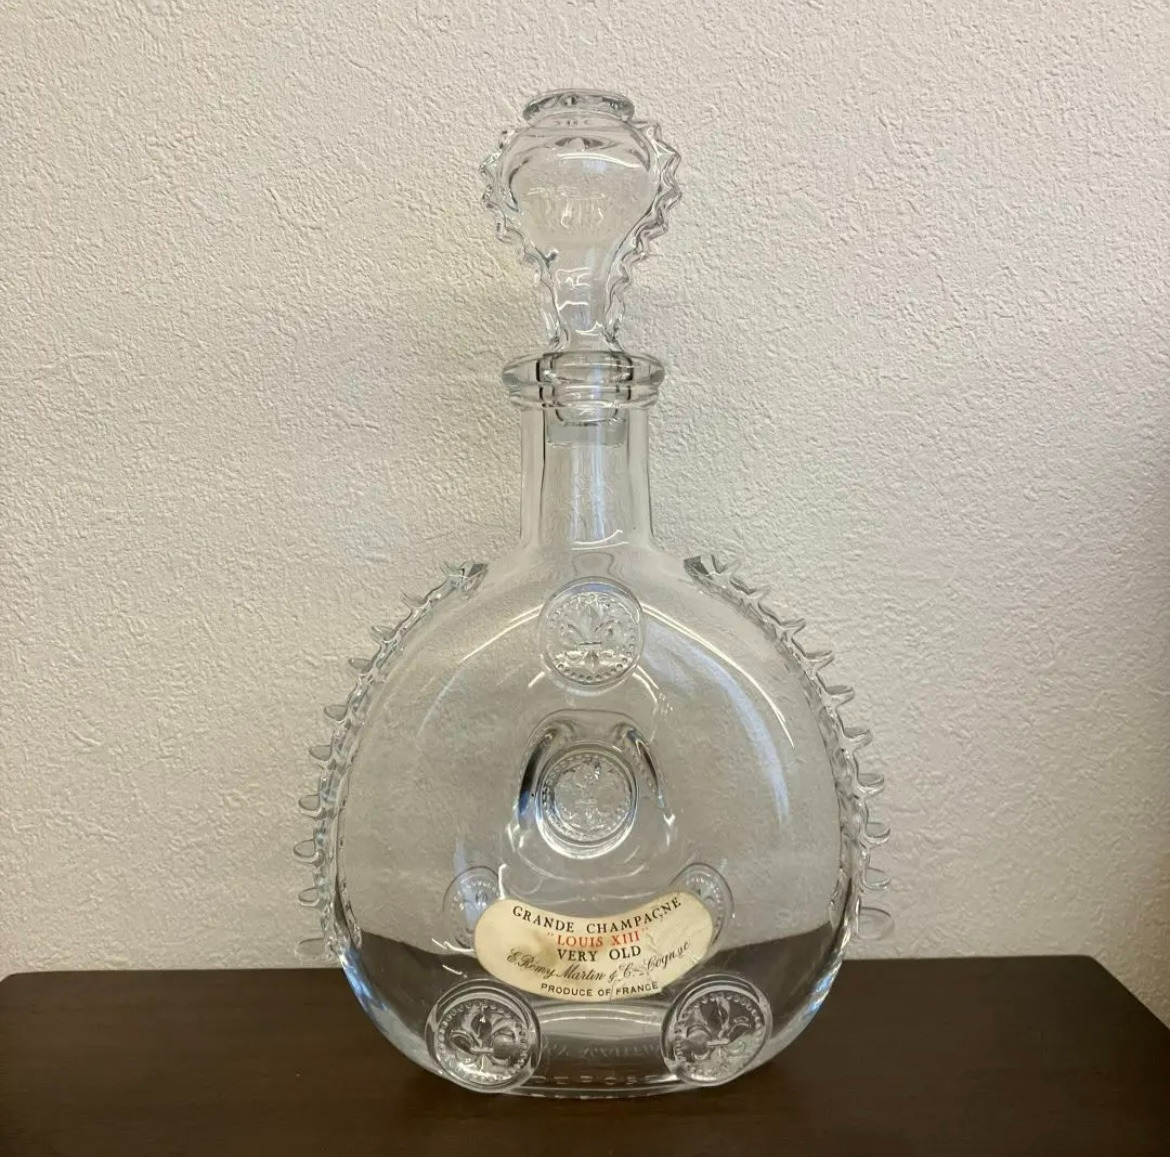 BACCARAT REMY MARTIN LOUIS XIII EMPTY COGNAC CRYSTAL DECANTER 700ml very old